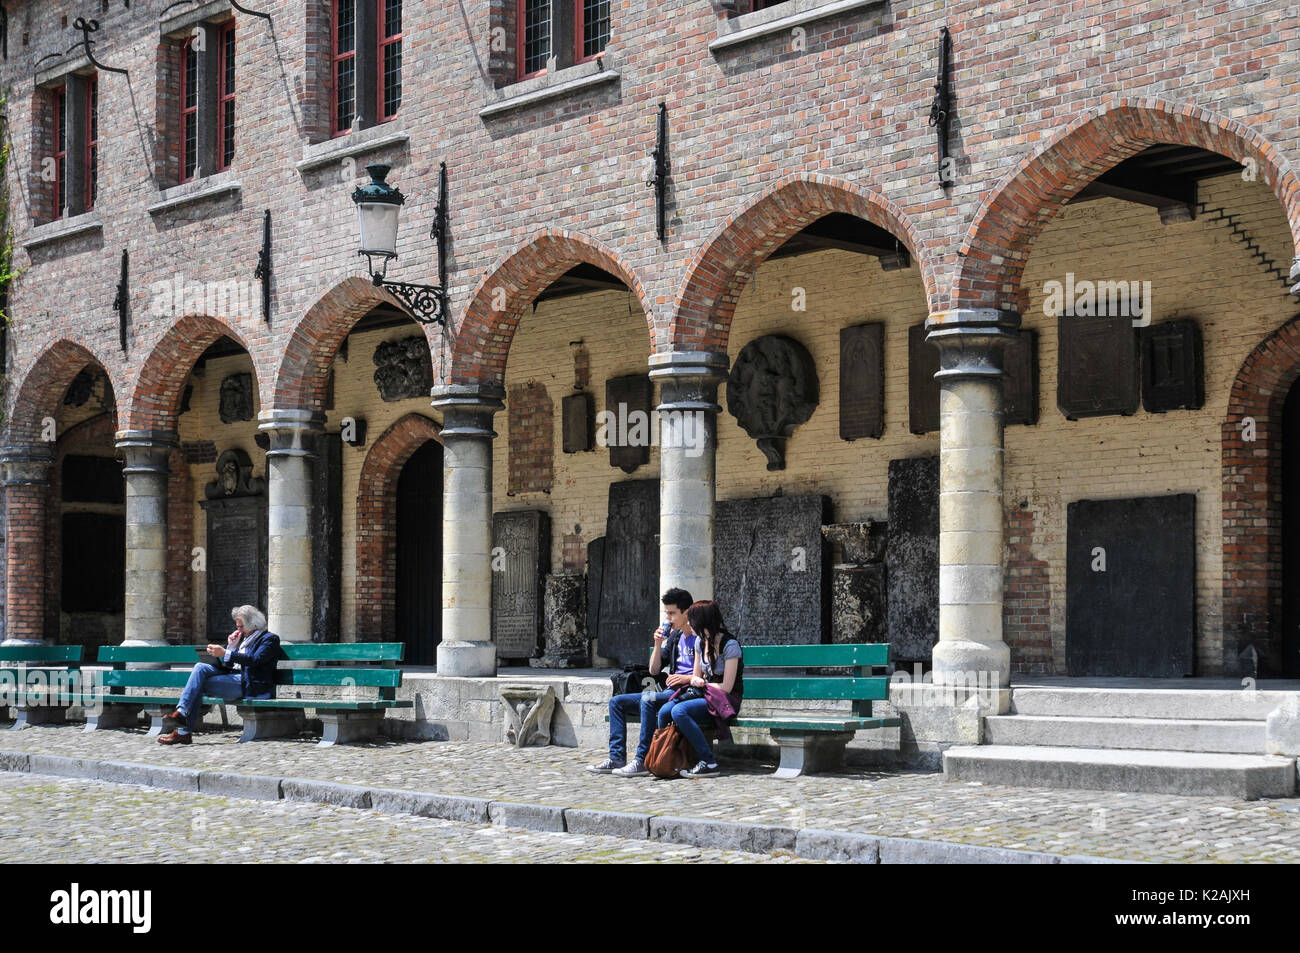 Three people enjoying sitting in the sunshine on benches outside the medieval arches of the Gruuthusemuseum in the city of Brugge / Bruges in Belgium Stock Photo